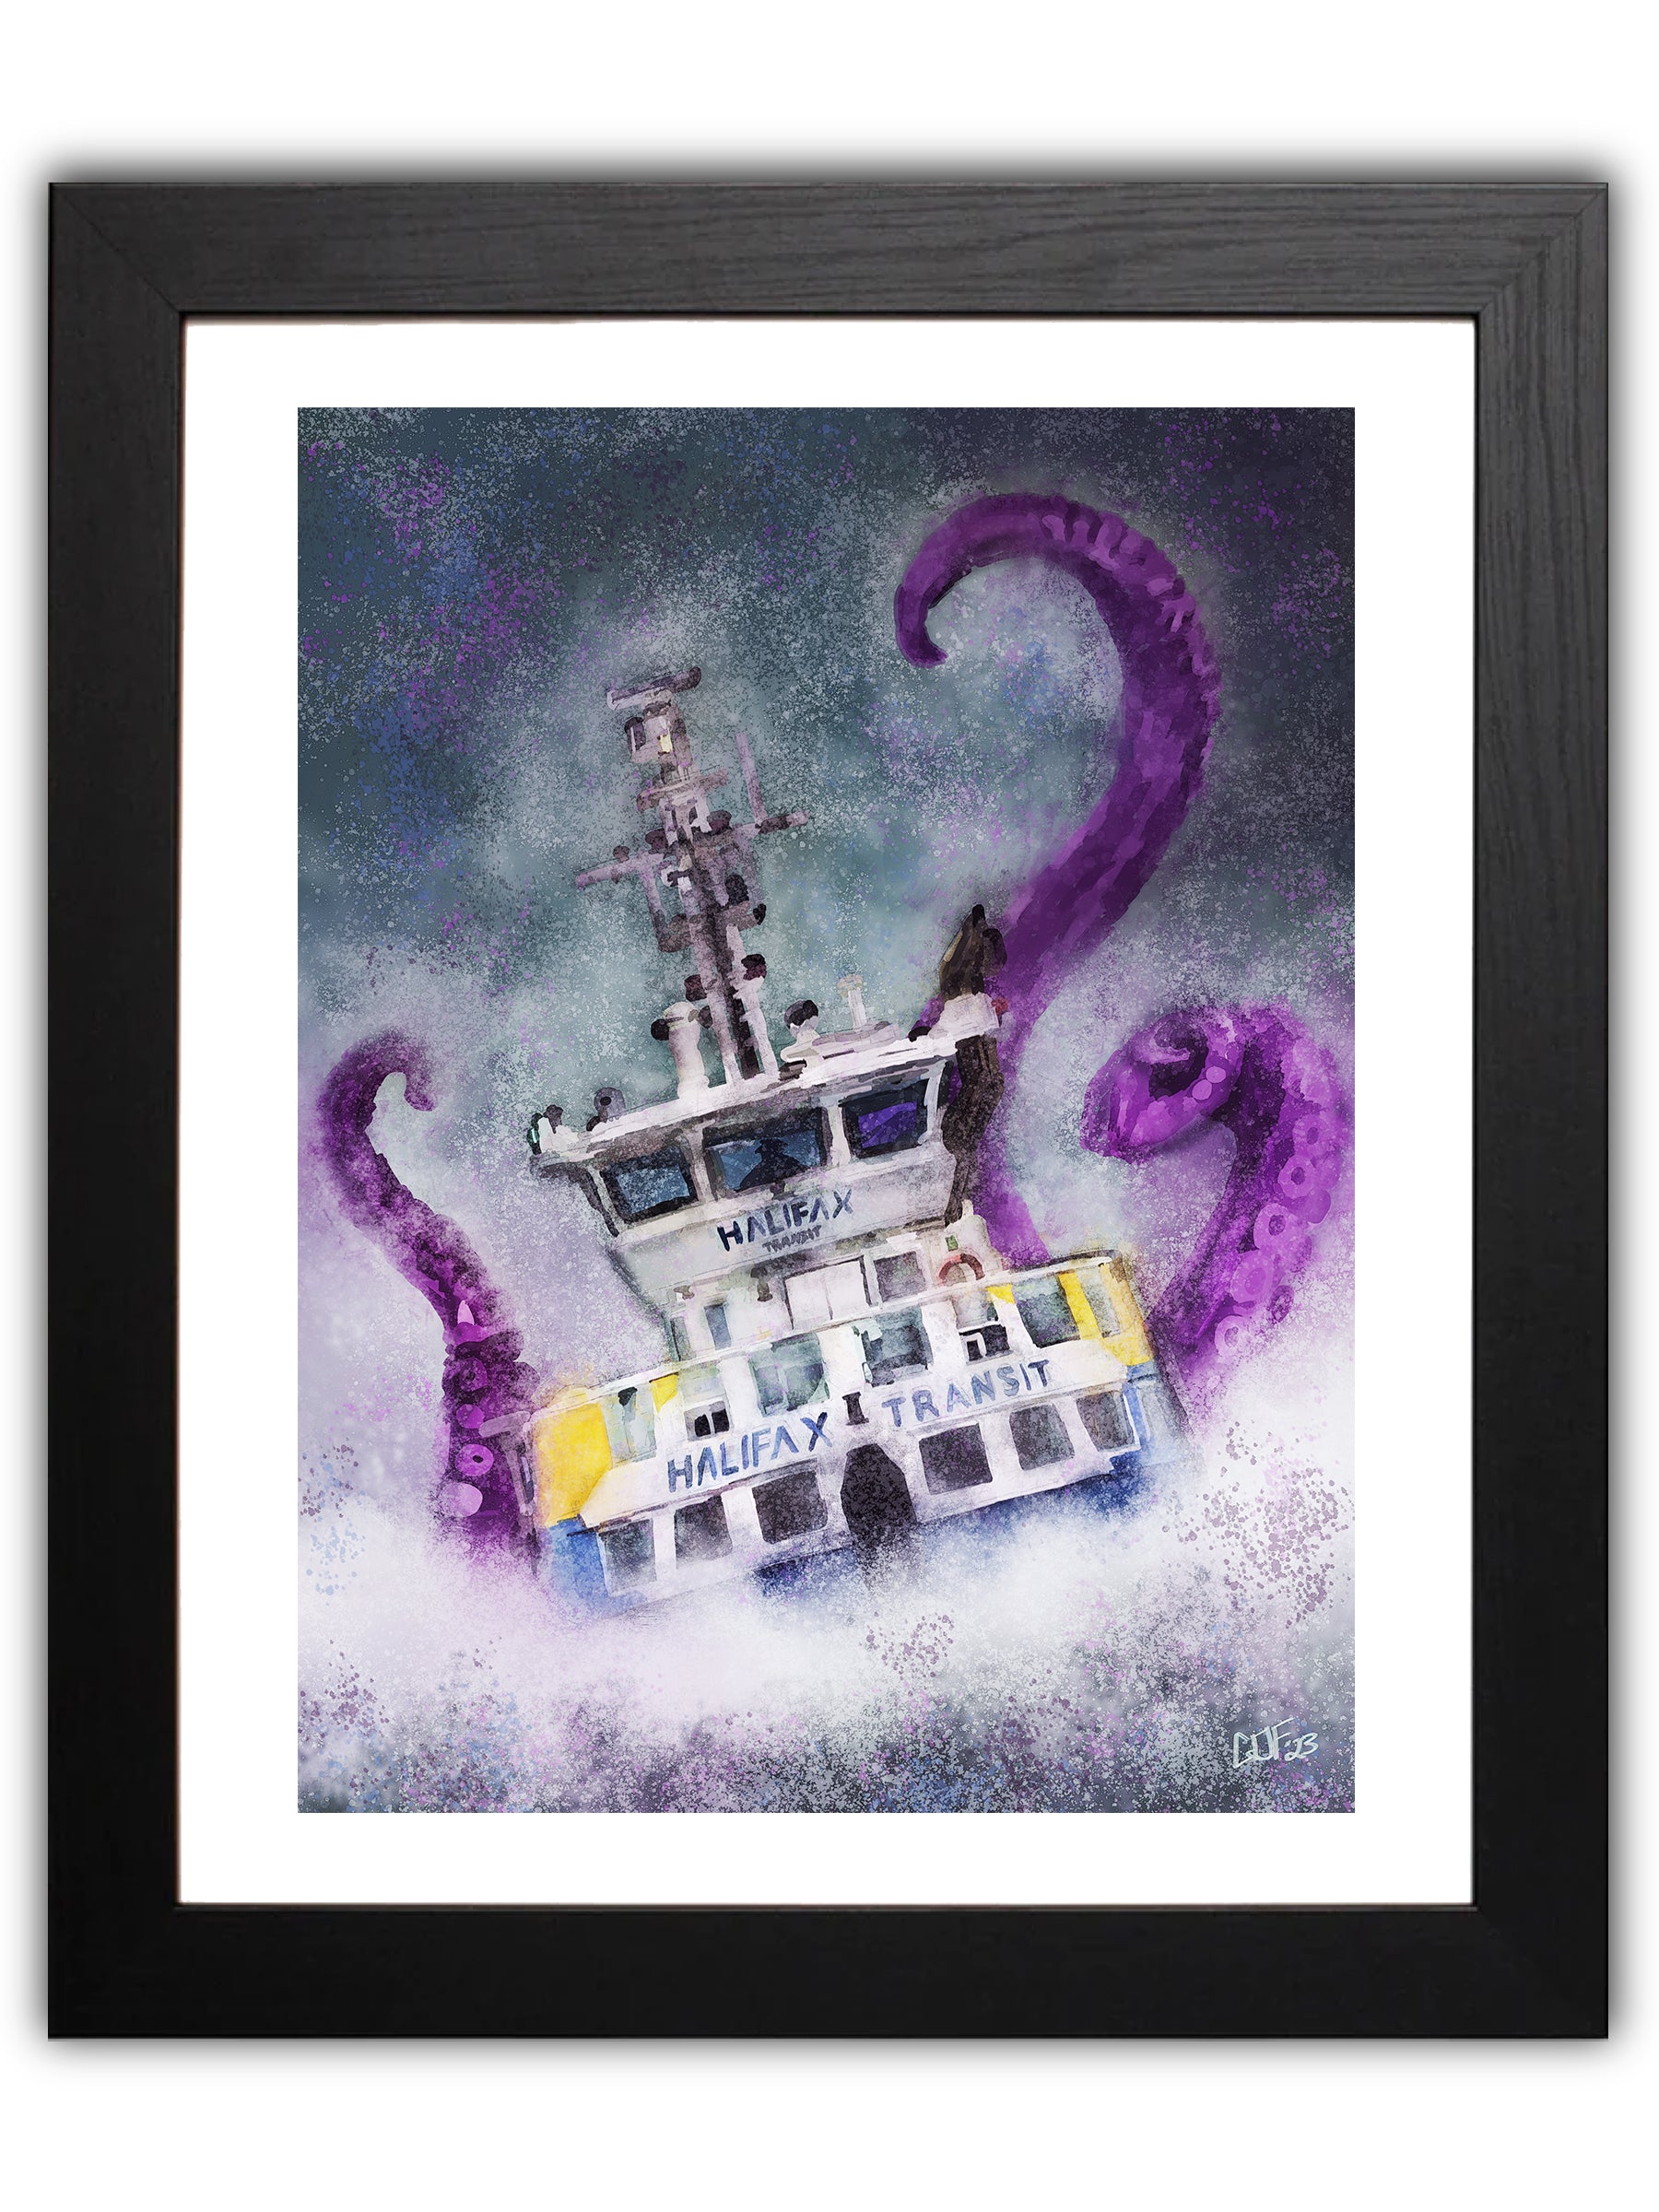 Halifax Ferry being attacked by purple tentacles